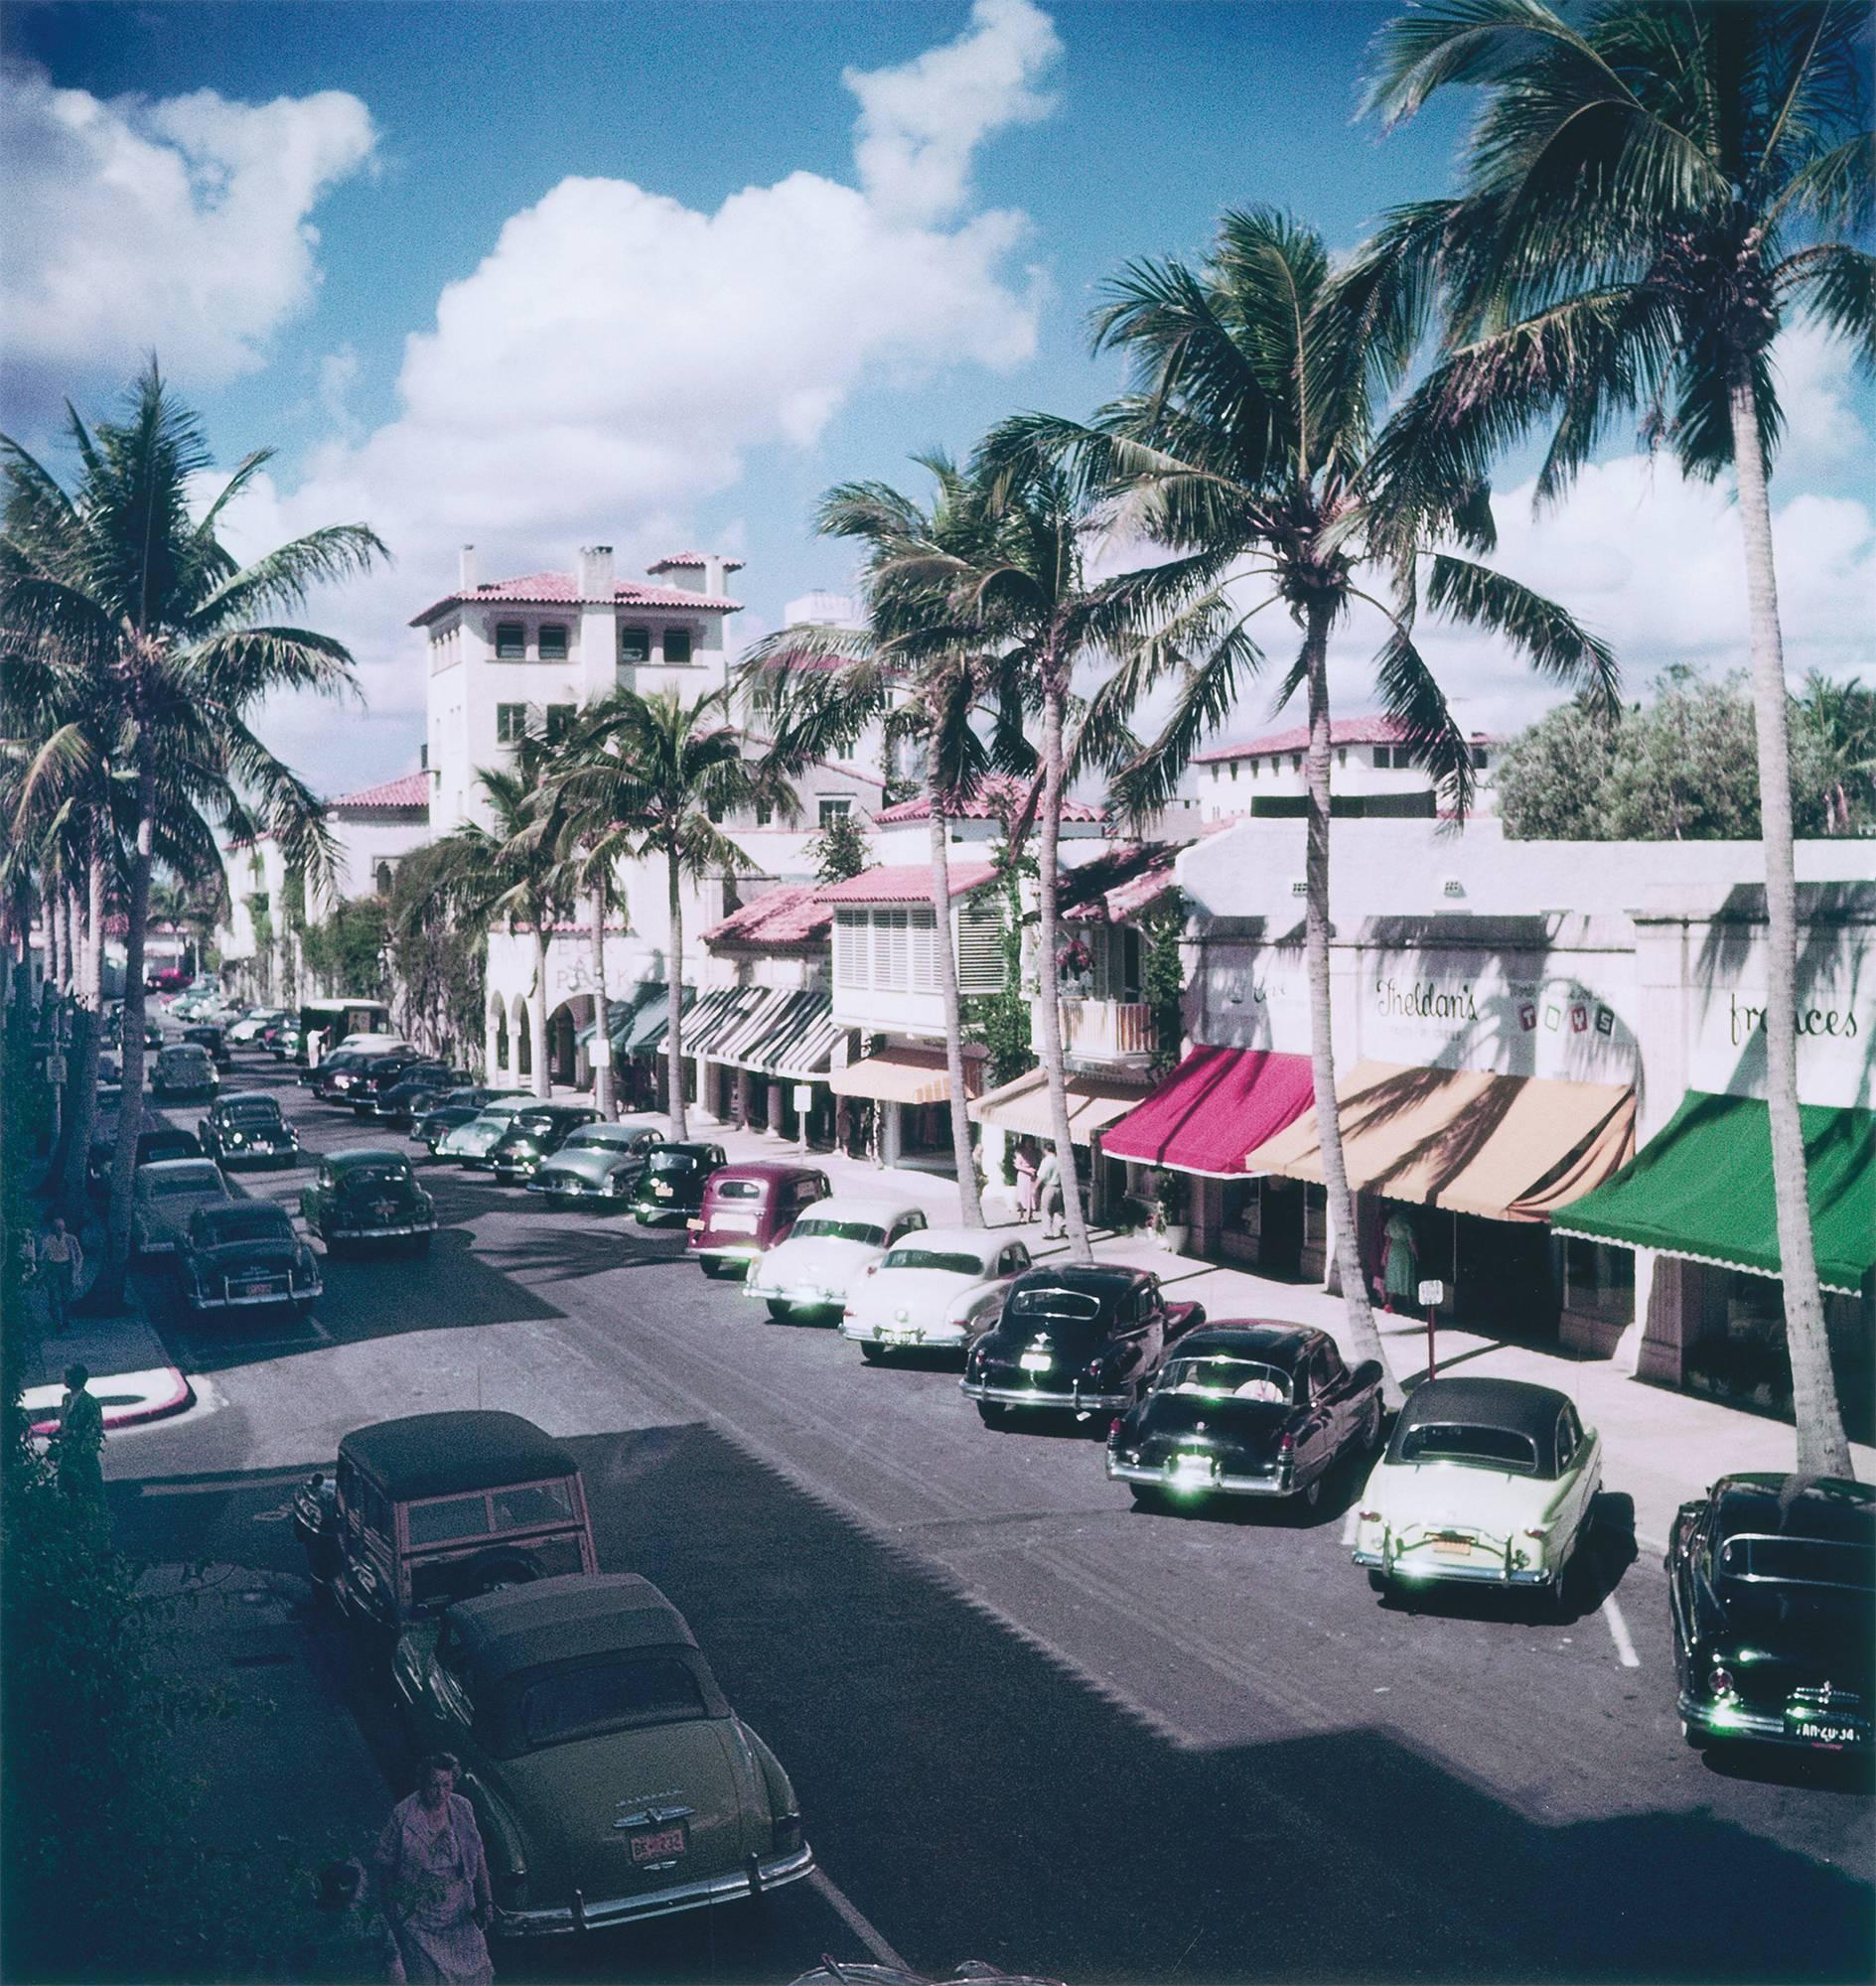 Cars parked on a tree-lined street in Palm Beach, Florida, circa 1953. 
C print

Estate stamped and hand numbered edition of 150 with certificate of authenticity from the estate.   

Slim Aarons (1916-2006) worked mainly for society publications